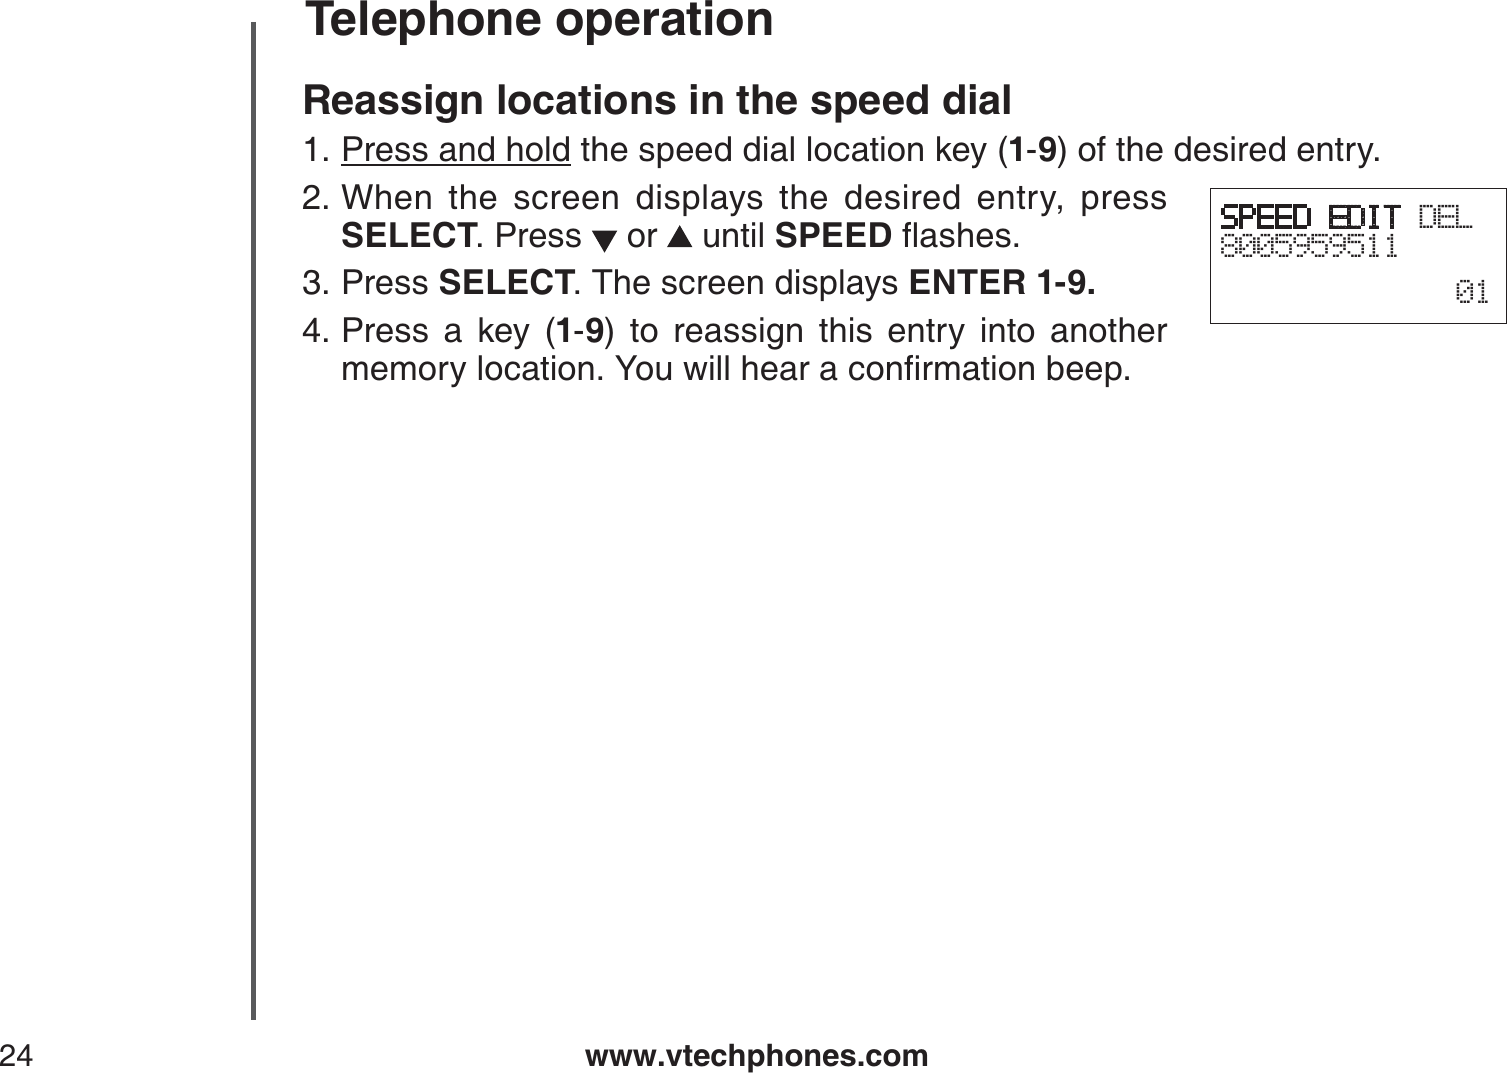 www.vtechphones.com24Telephone operationReassign locations in the speed dialPress and hold the speed dial location key (1-9) of the desired entry.When the screen displays the desired entry, press SELECT. Press   or   until SPEEDƀCUJGUPress SELECT. The screen displays ENTER 1-9.Press a key (1-9) to reassign this entry into another OGOQT[NQECVKQP;QWYKNNJGCTCEQPſTOCVKQPDGGR1.2.3.4.SPEED EDIT DEL800595951101